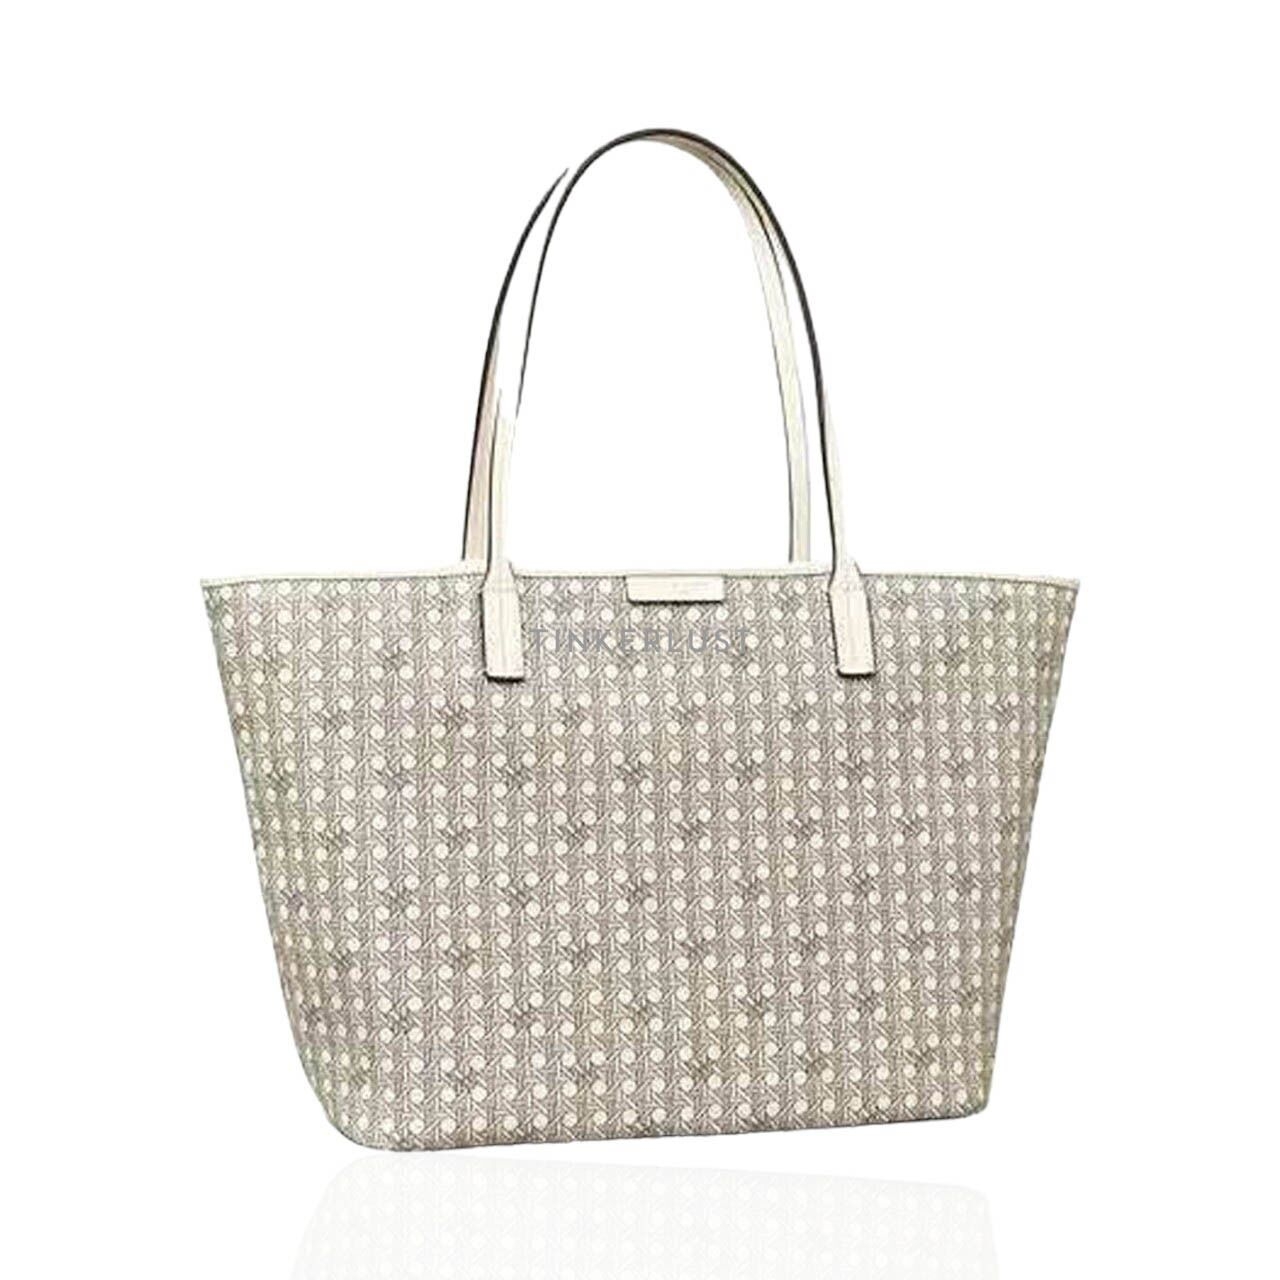 Tory Burch Ever-Ready Zip In New Ivory Large Tote Bag 